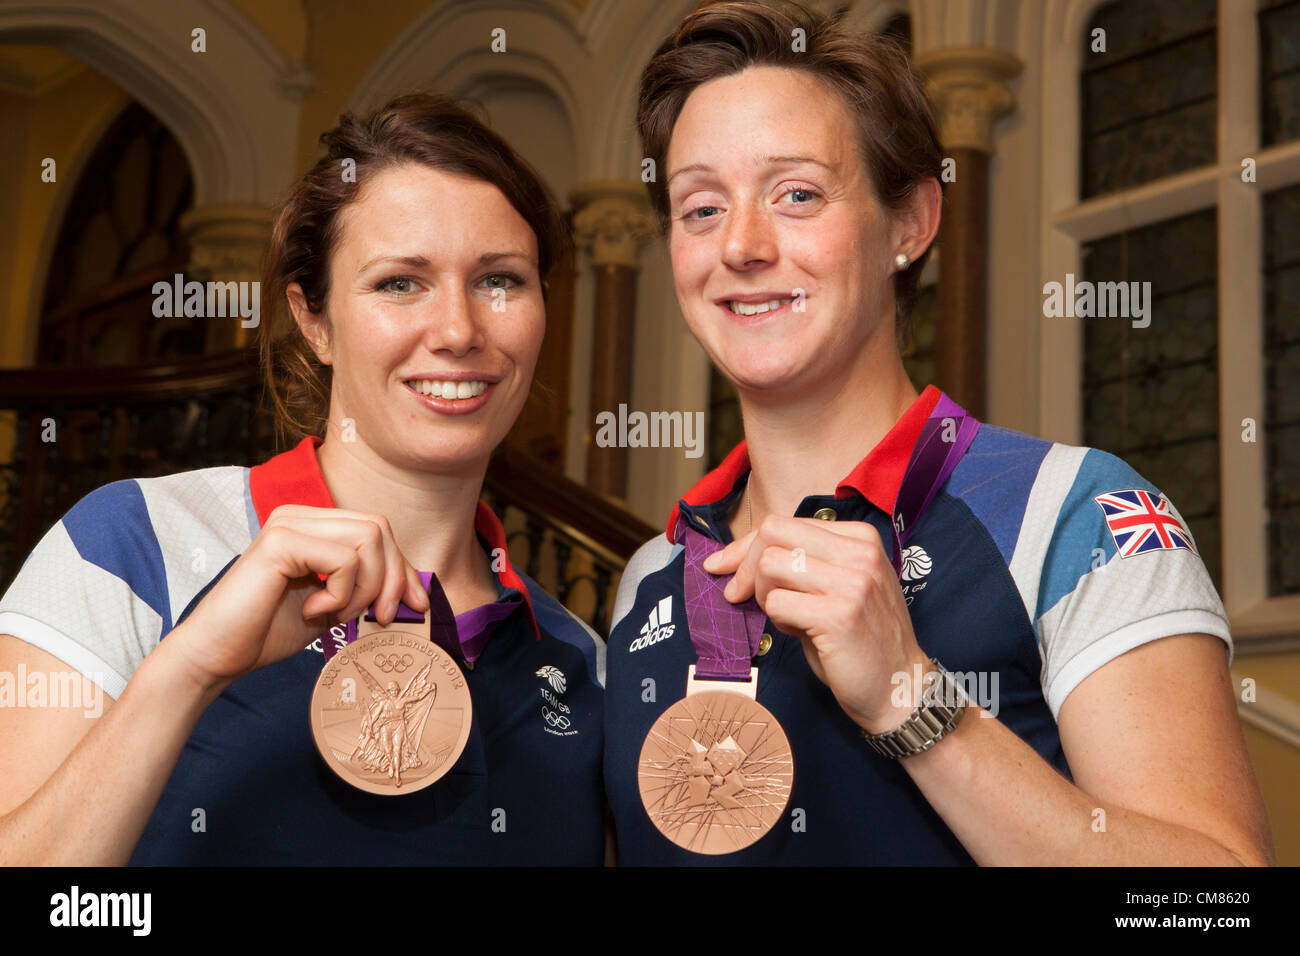 Anne Panter (Left) and Hannah Macleod posing with their Lonon 2012 Bronze Medals, Hannah's Medal was stolen earlier this week from an event in Mayfair. A Met spokesman said: 'An Olympic medal and blazer were reported stolen from a venue in Mayfair in central London. 'It was believed the items were taken between midnight and 5am on Wednesday, October 24.'  Officers are continuing to investigate the incident but no arrests have been made, the spokesman added.  Macleod, 28, achieved bronze at London 2012 after Team GB's women's hockey team beat New Zealand to secure a medal. Stock Photo